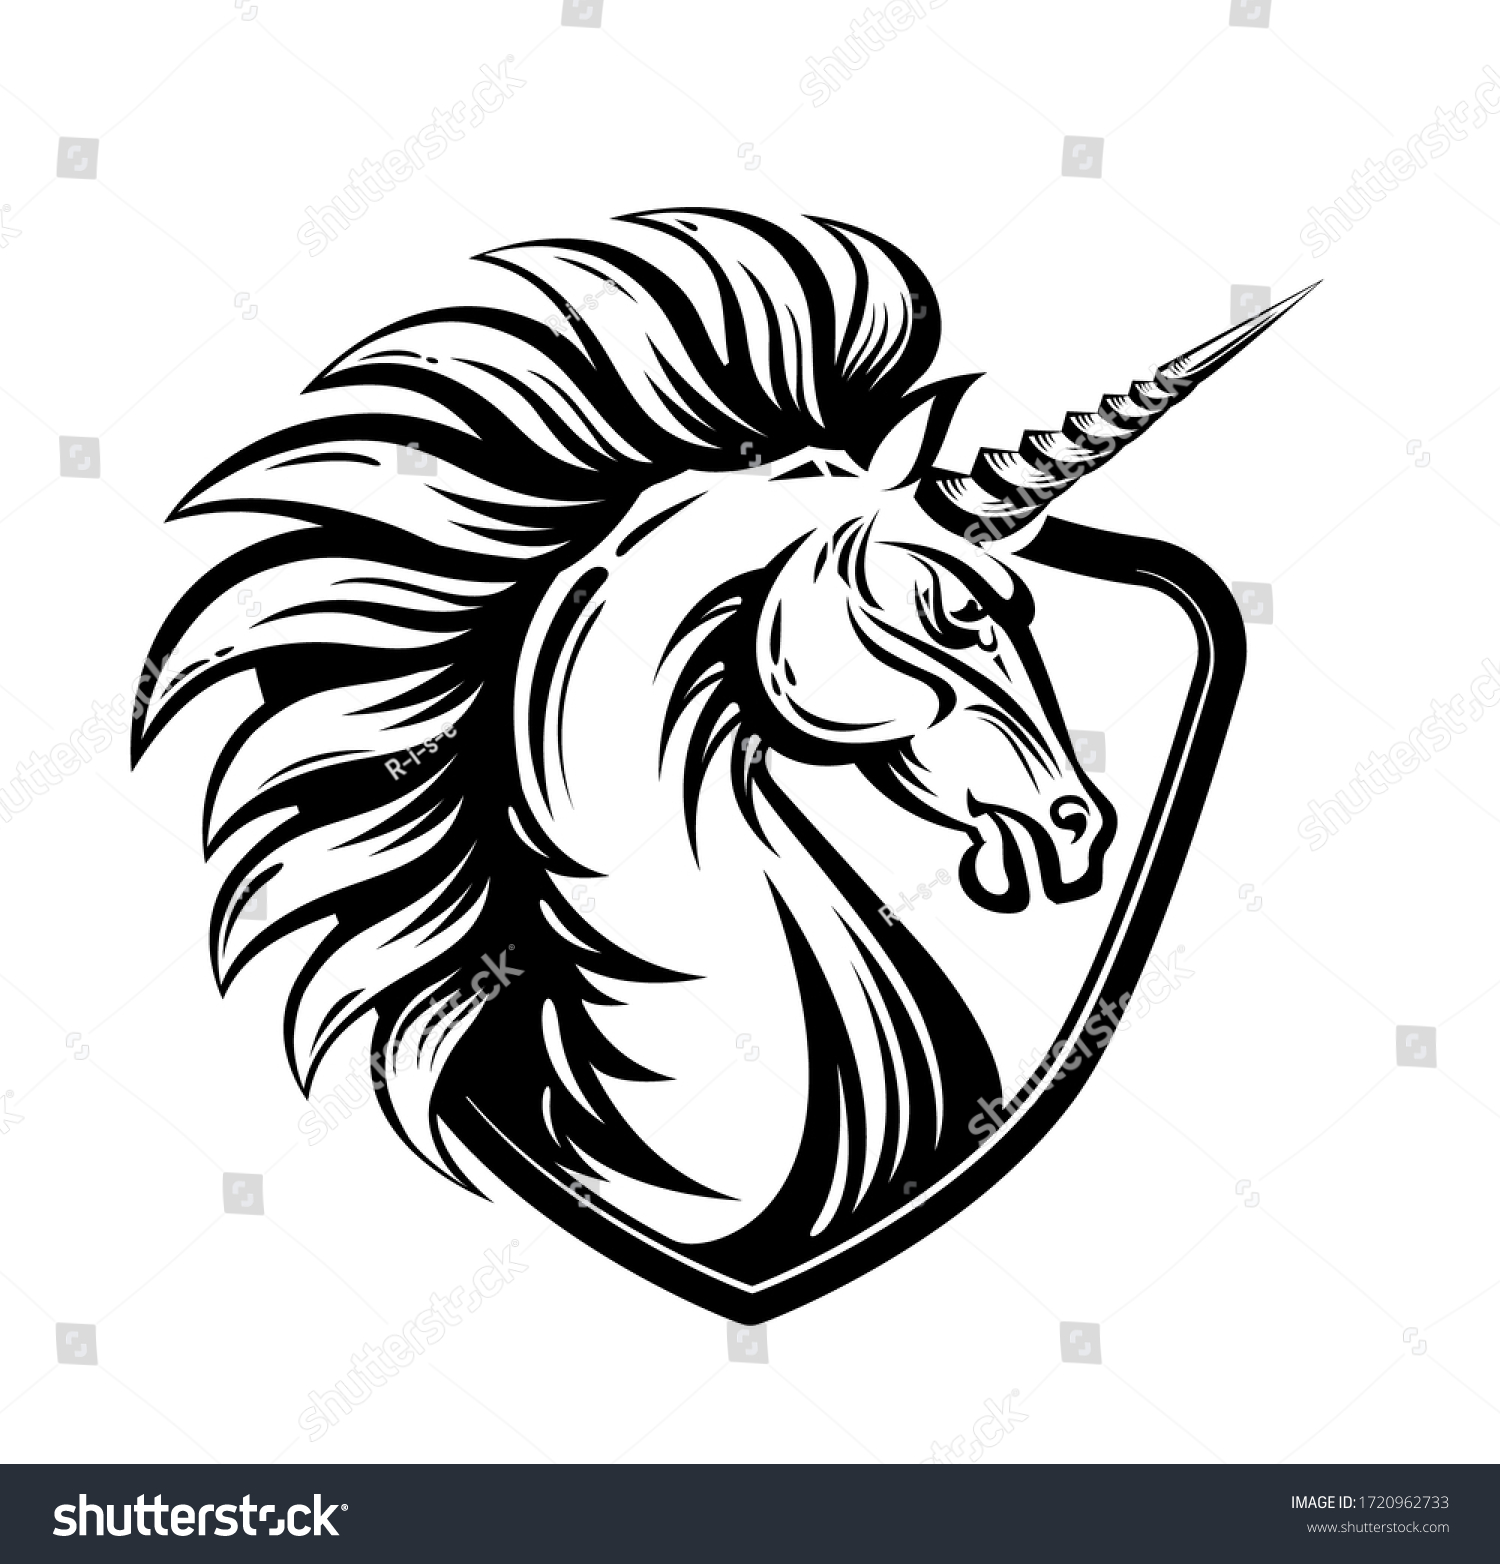 SVG of Angry Unicorn head emblem with shield. Fury Magic animal illustration in black and white. Vector art for icon, apparel print, insignia, mascot, sport or game team emblem, fairy tale book. svg